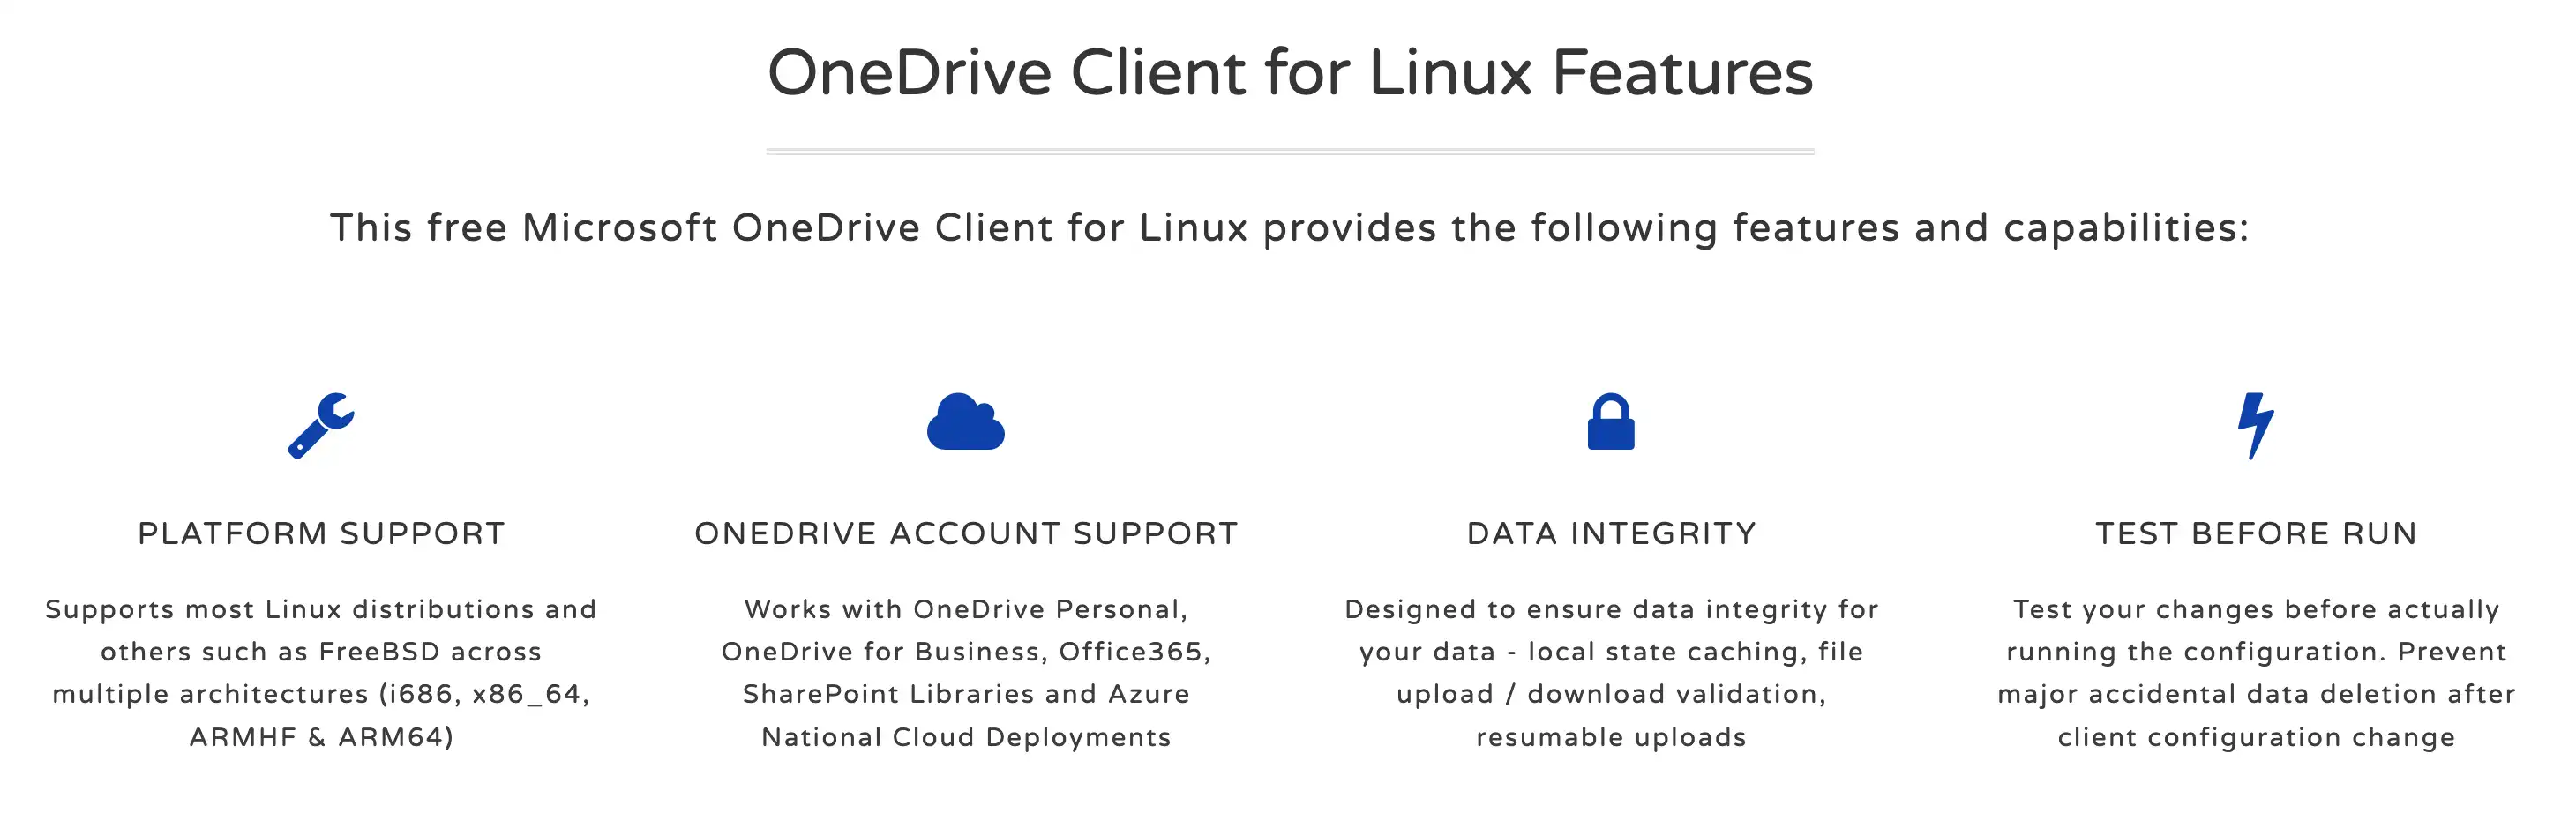 Download web tool or web app OneDrive Client for Linux